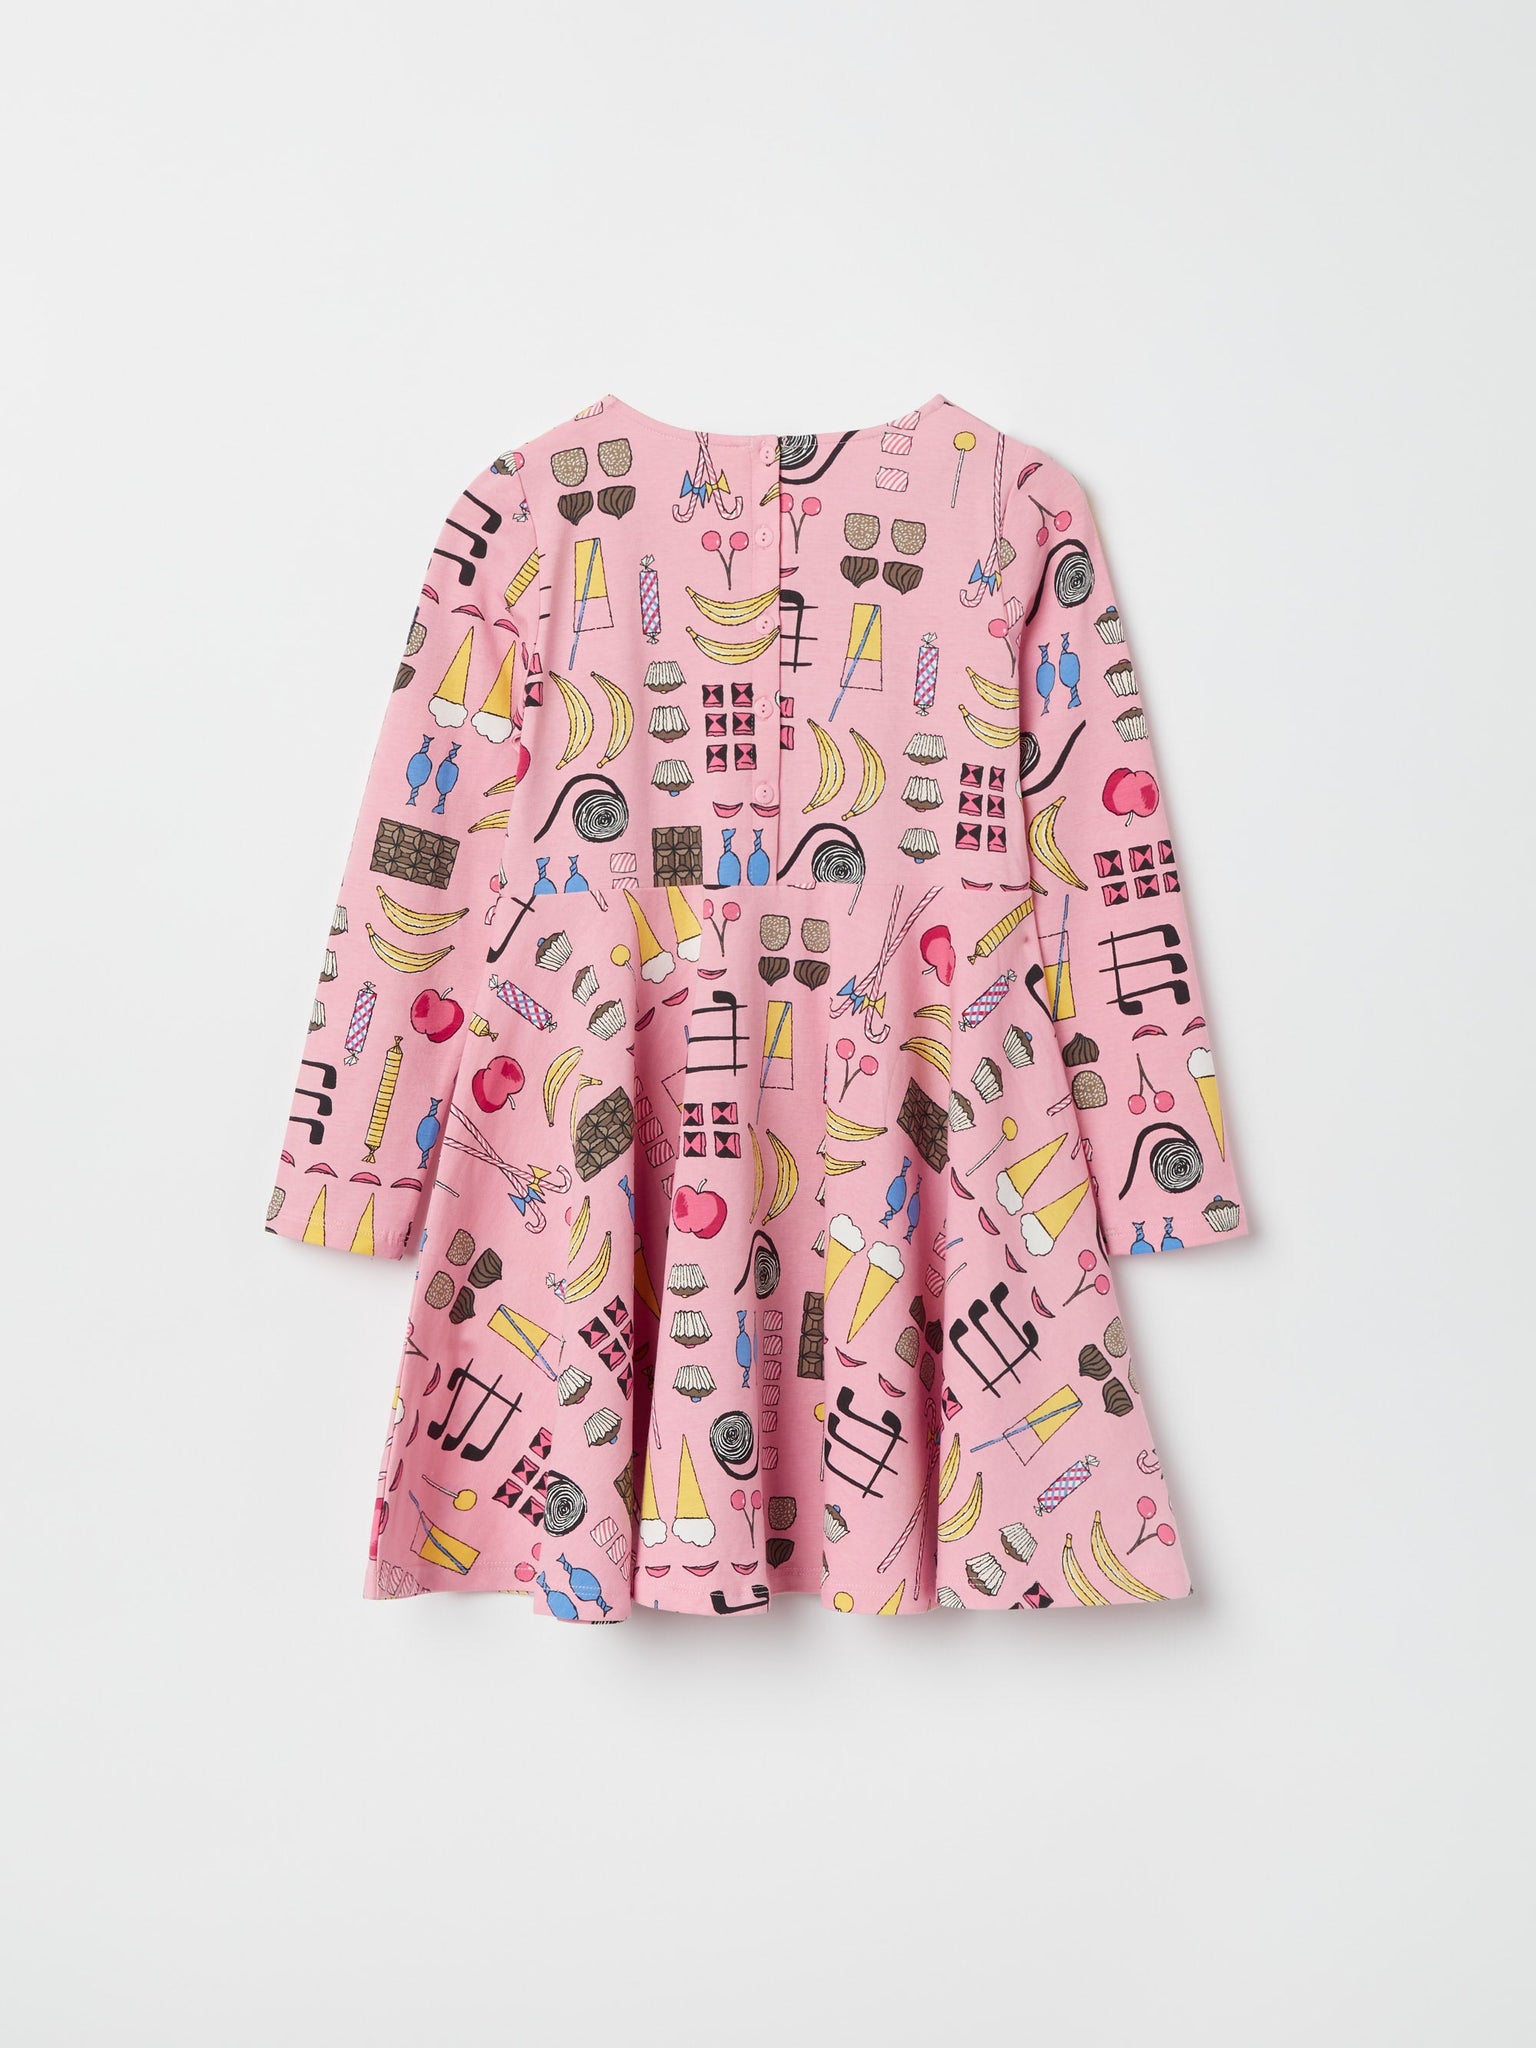 Sweet Treats Print Kids Dress from the Polarn O. Pyret kidswear collection. Nordic kids clothes made from sustainable sources.